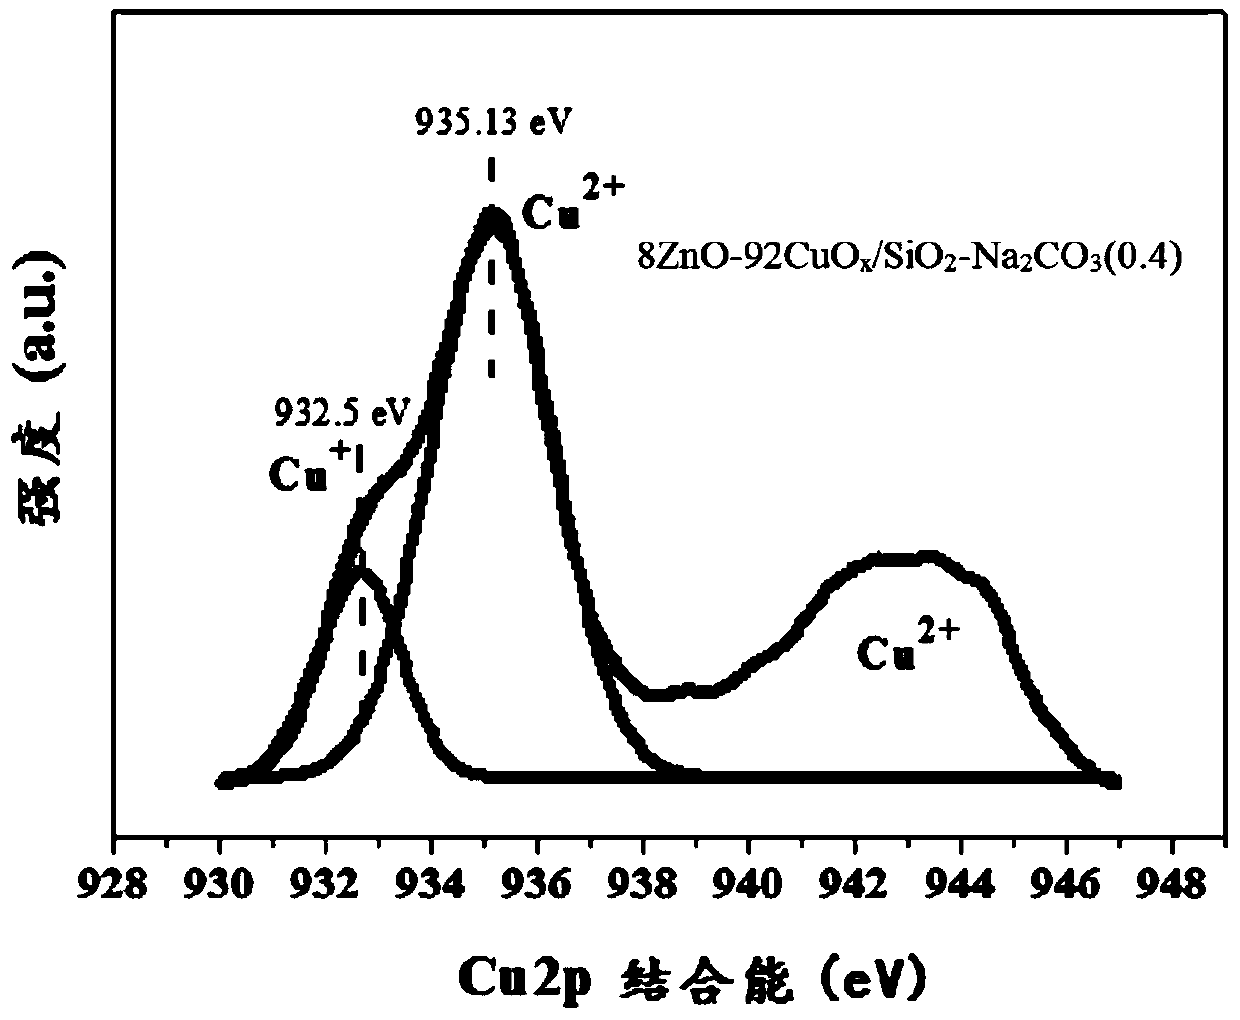 ZnO-CuOx/SiO2 catalyst, composite catalyst, and application and preparation method of ZnO-CuOx/SiO2 catalyst and composite catalyst